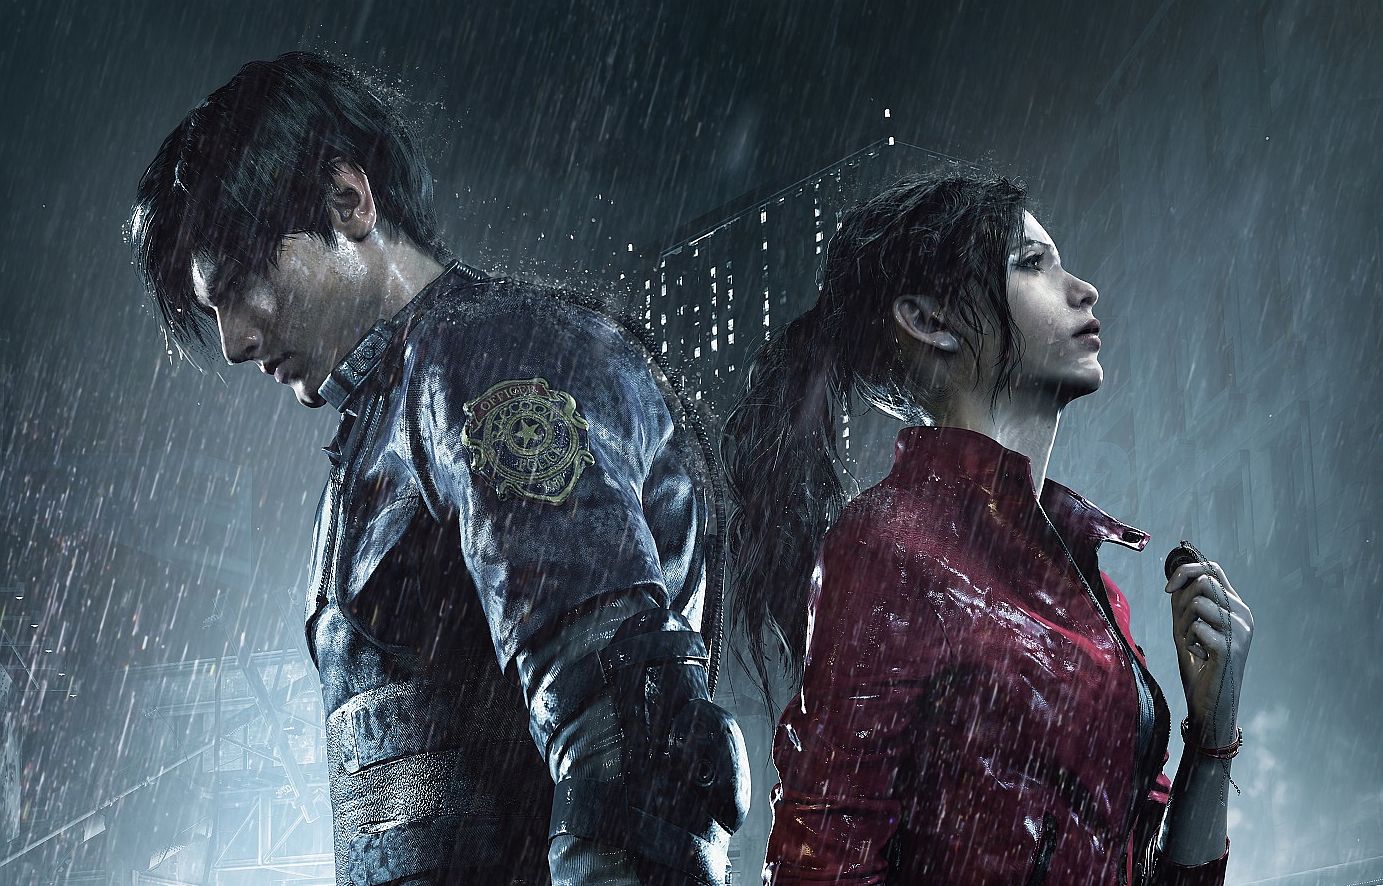 Resident Evil 2 shipped 3 million copies in its first week